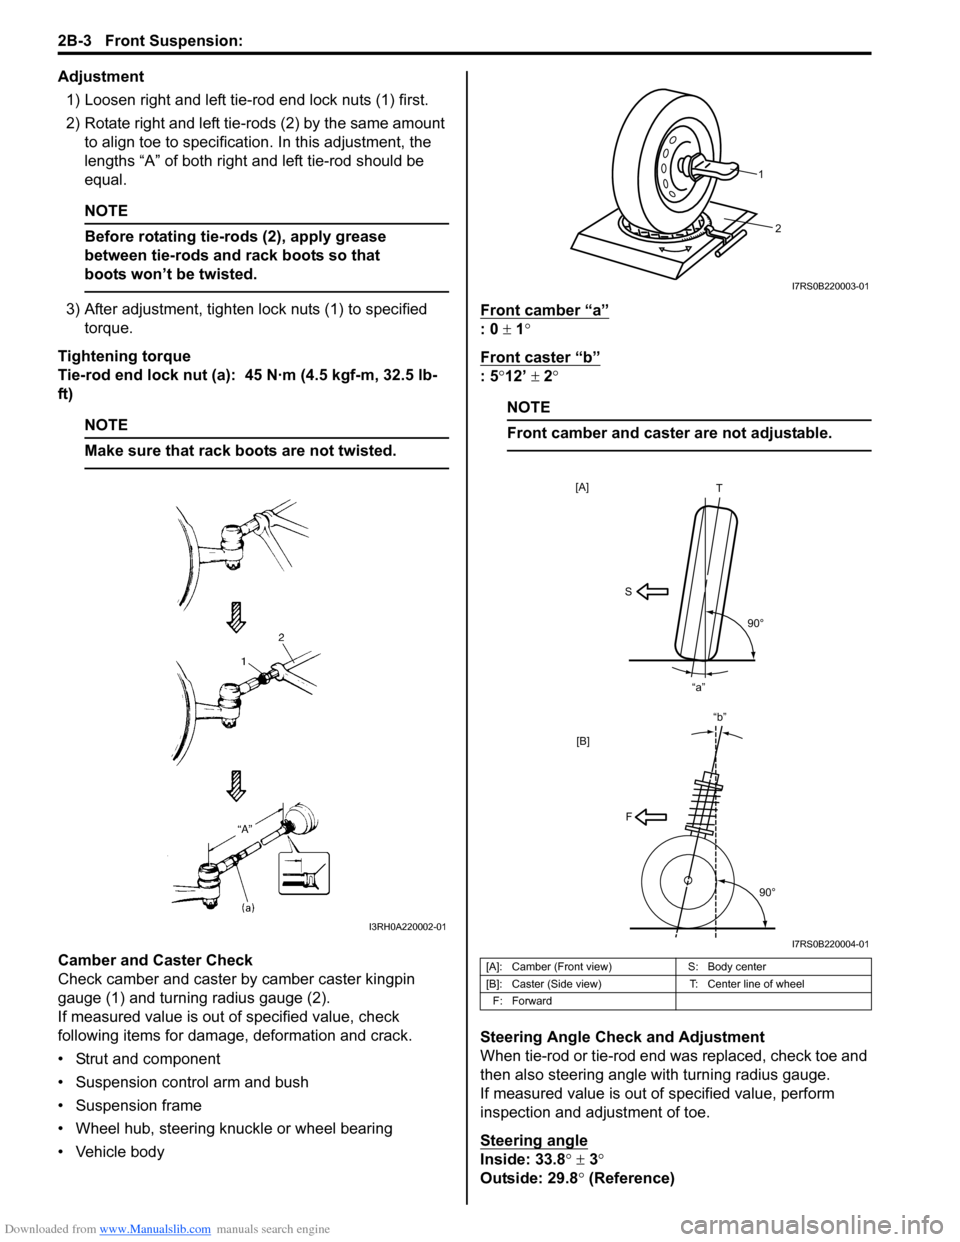 SUZUKI SWIFT 2006 2.G Service Workshop Manual Downloaded from www.Manualslib.com manuals search engine 2B-3 Front Suspension: 
Adjustment1) Loosen right and left tie-rod end lock nuts (1) first.
2) Rotate right and left tie-rods (2) by the same a